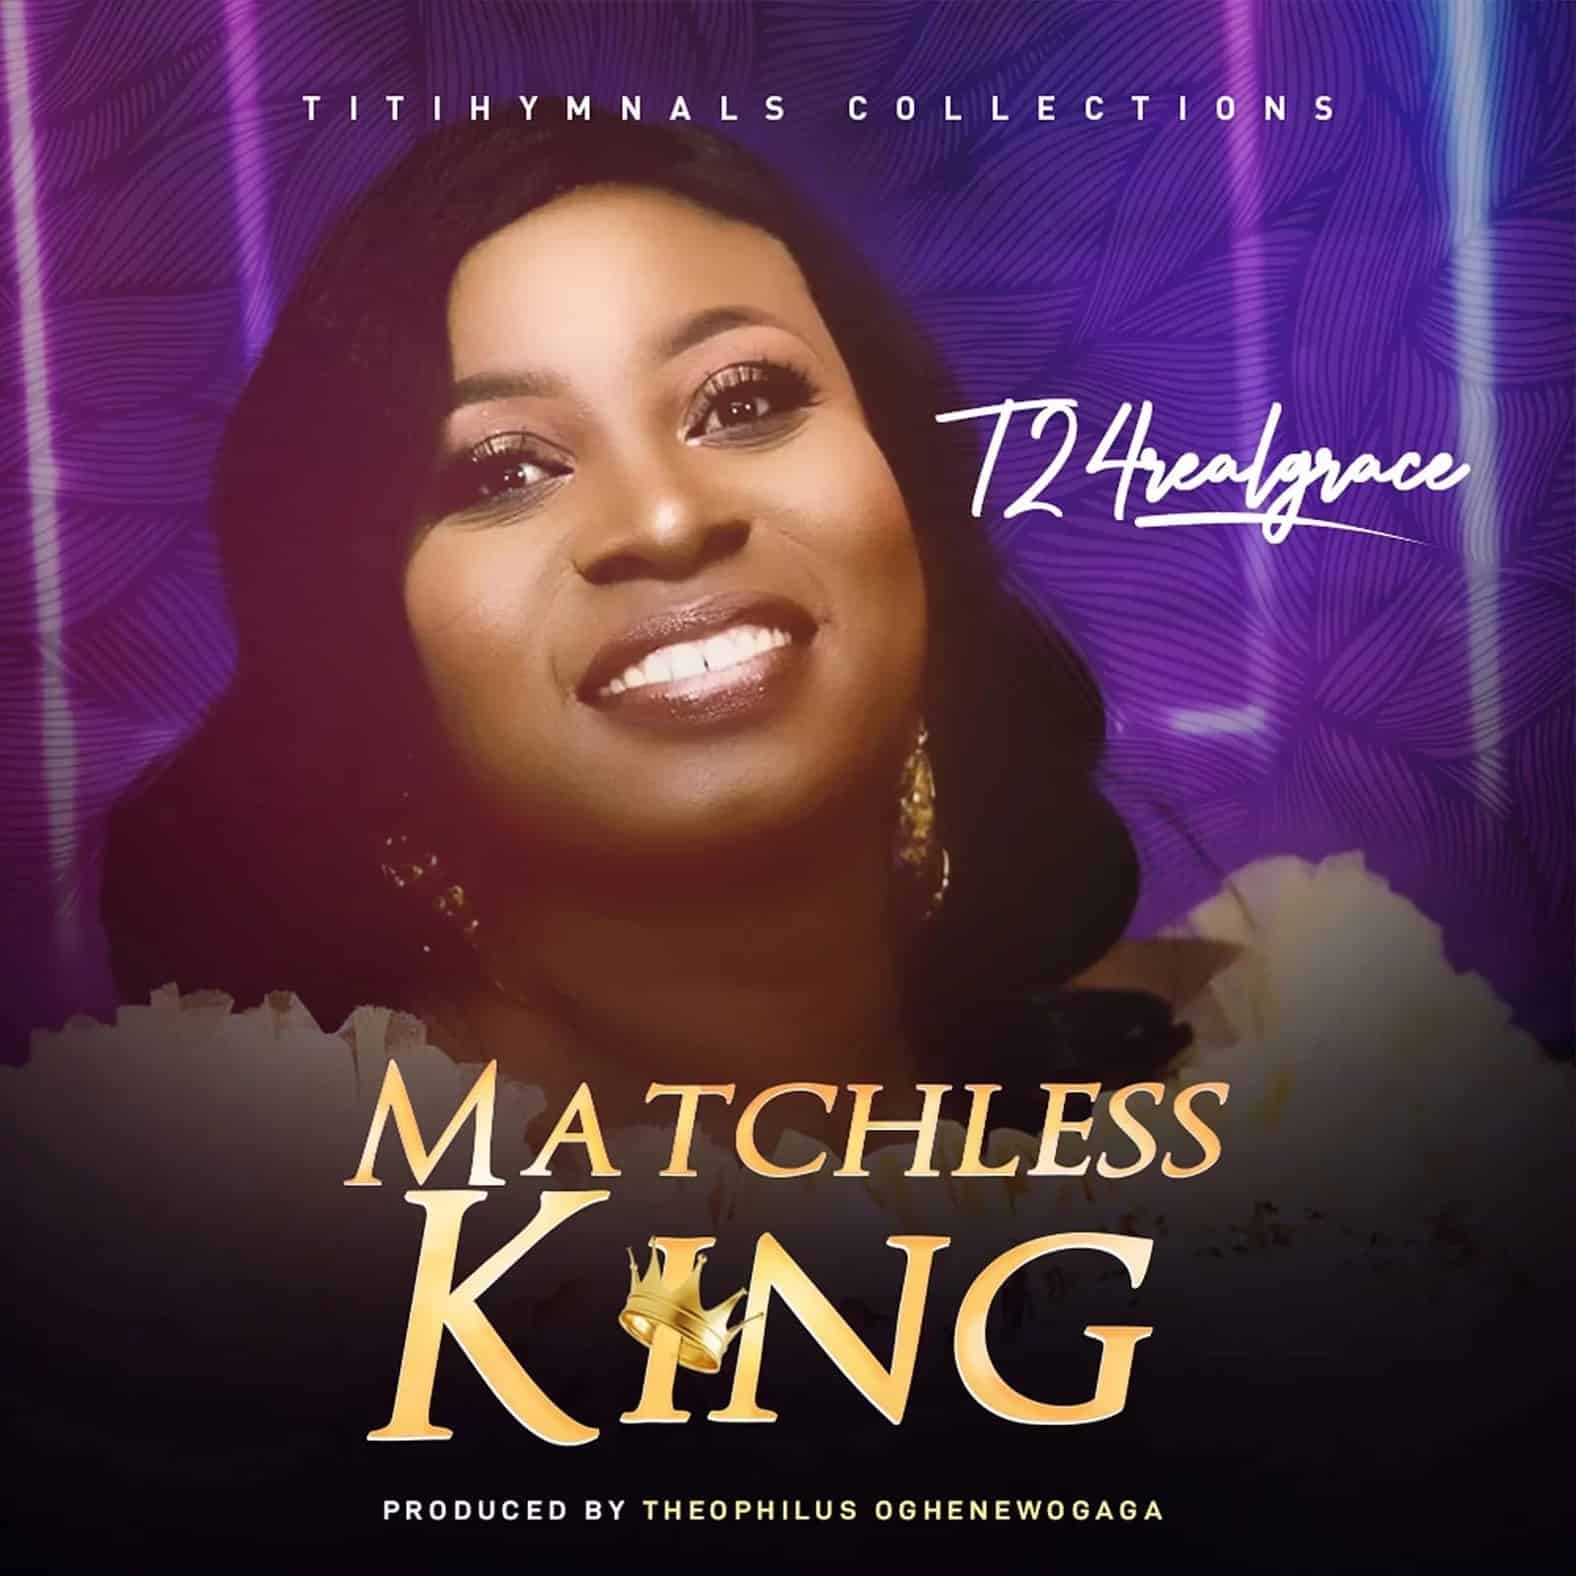 Download Mp3: T2 4 Real Grace - Matchless King